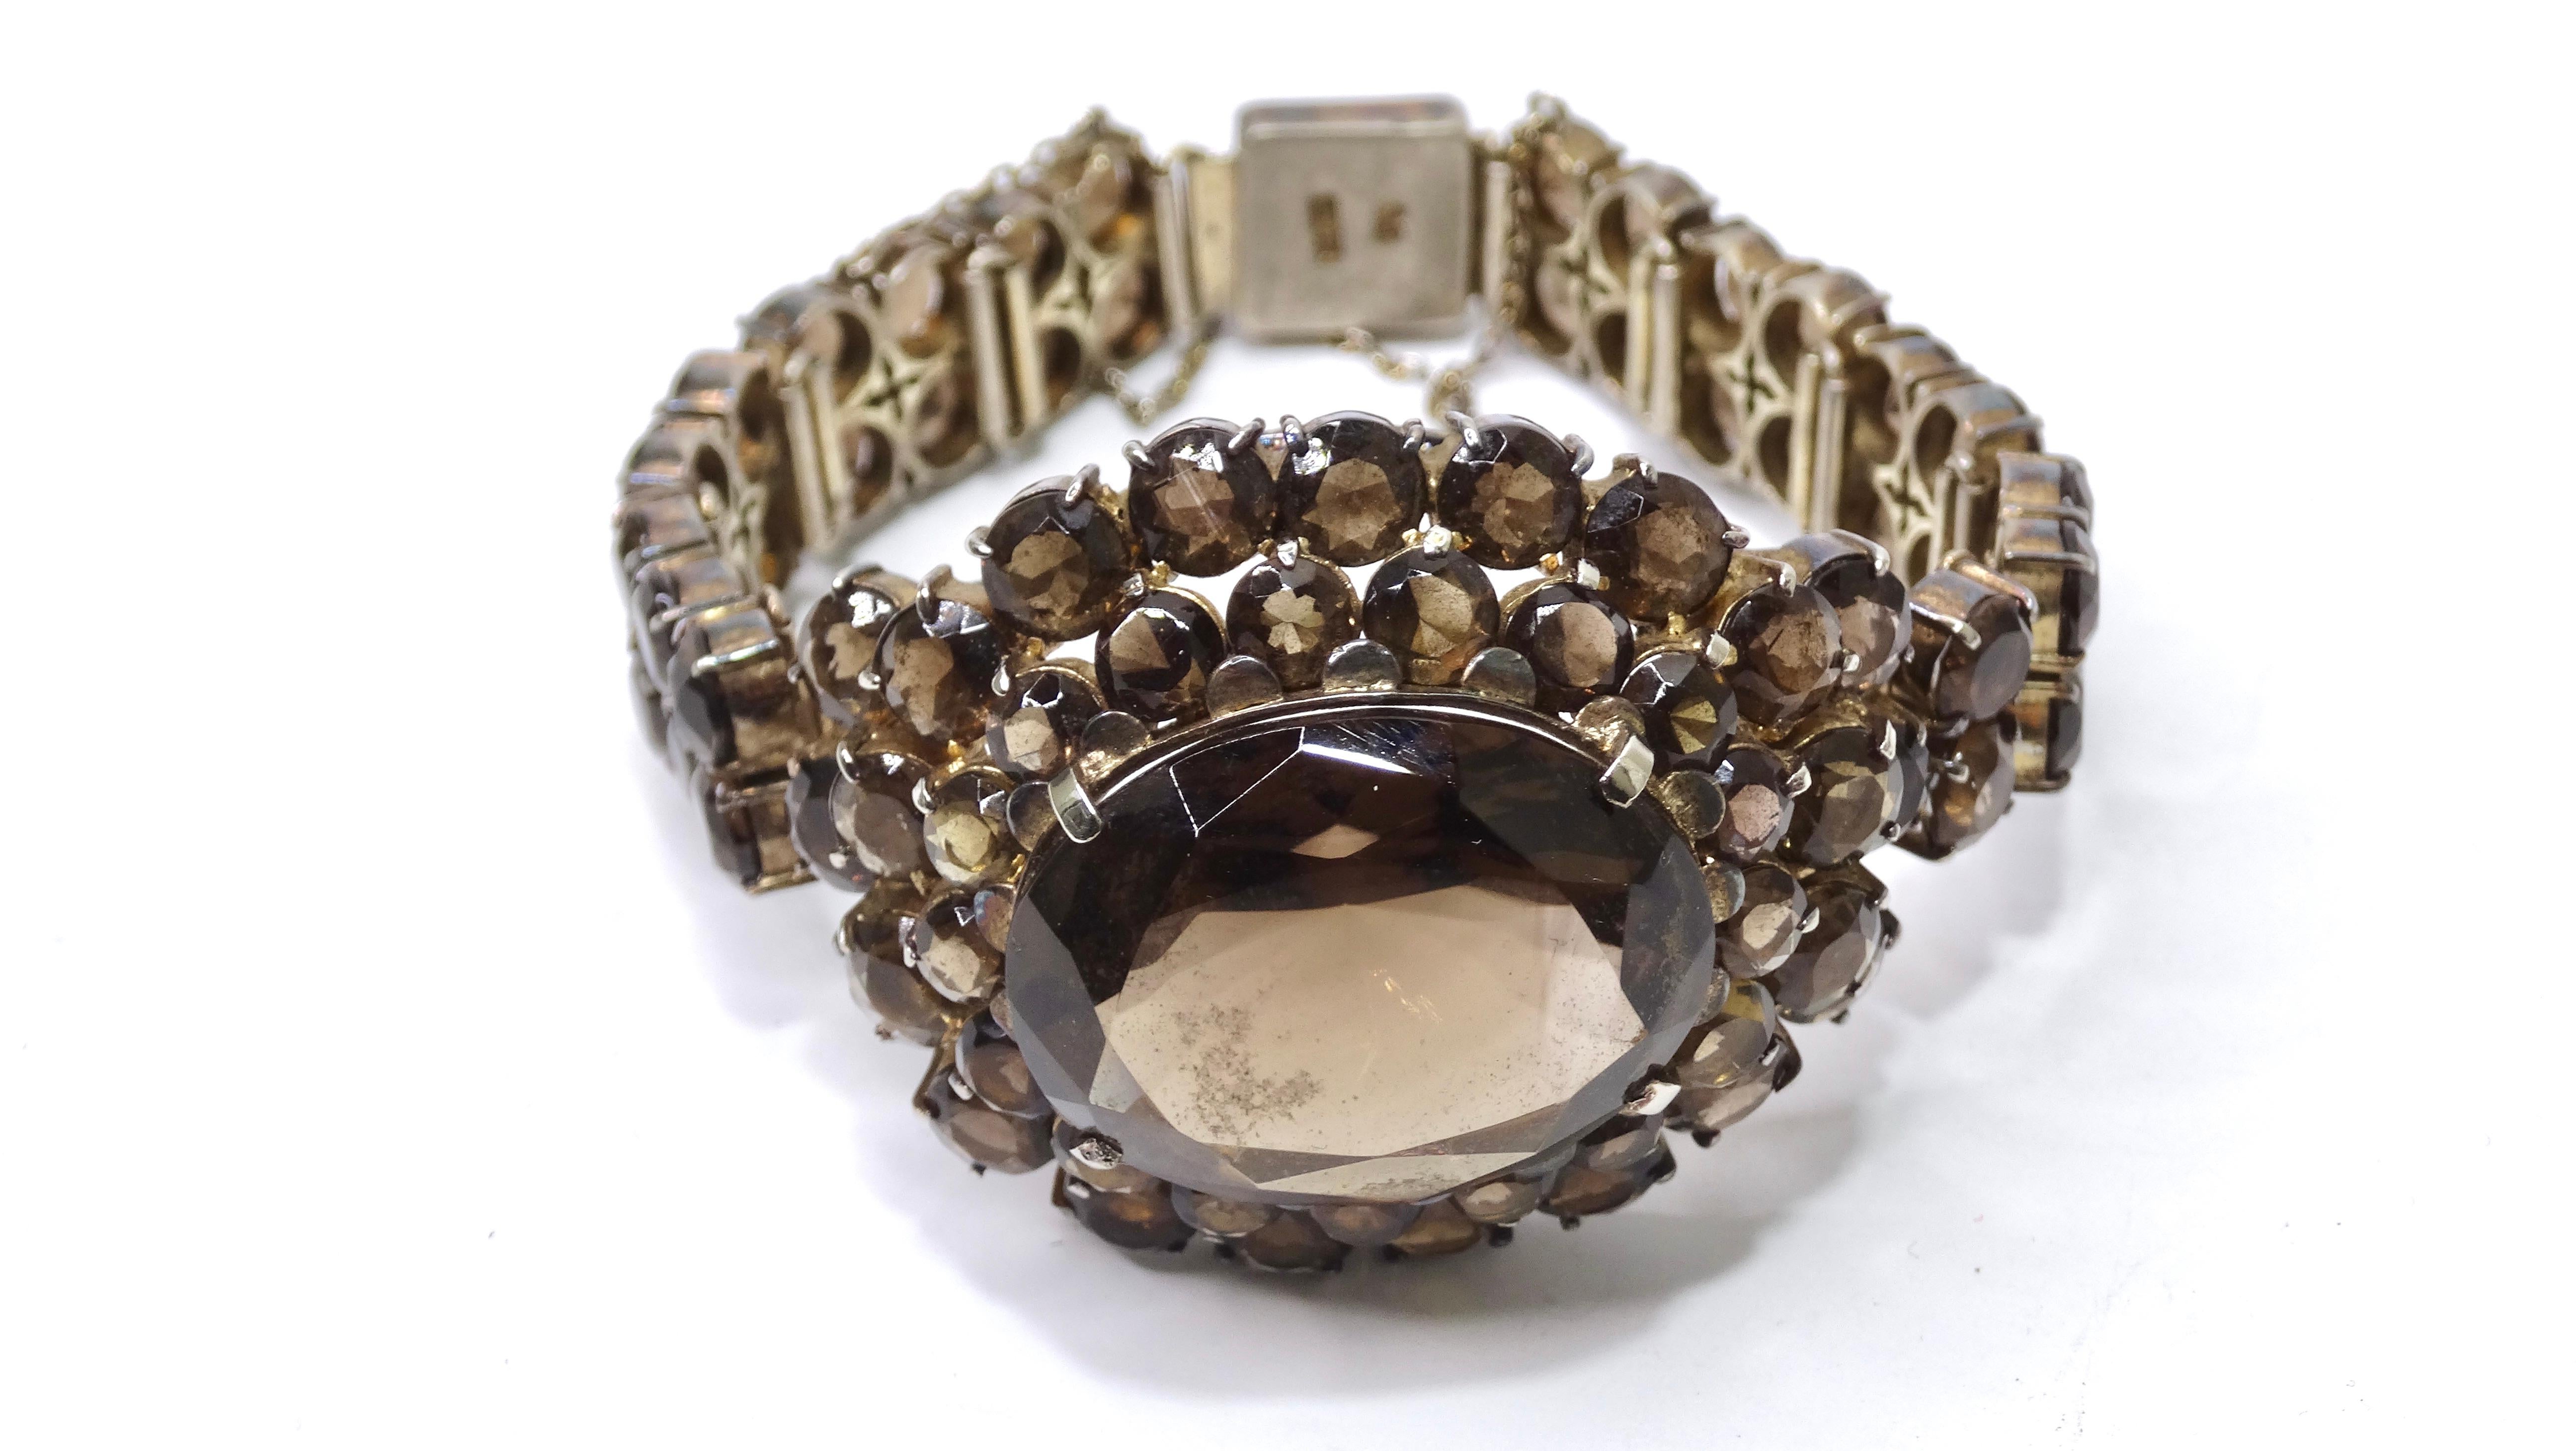 Do not miss out on the chance to get this ultra-rare piece of fine jewelry that you cannot get anywhere else! This bracelet will make your outfit! This vintage 1950's silver quartz encrusted bracelet has to be in your jewelry collection! It is